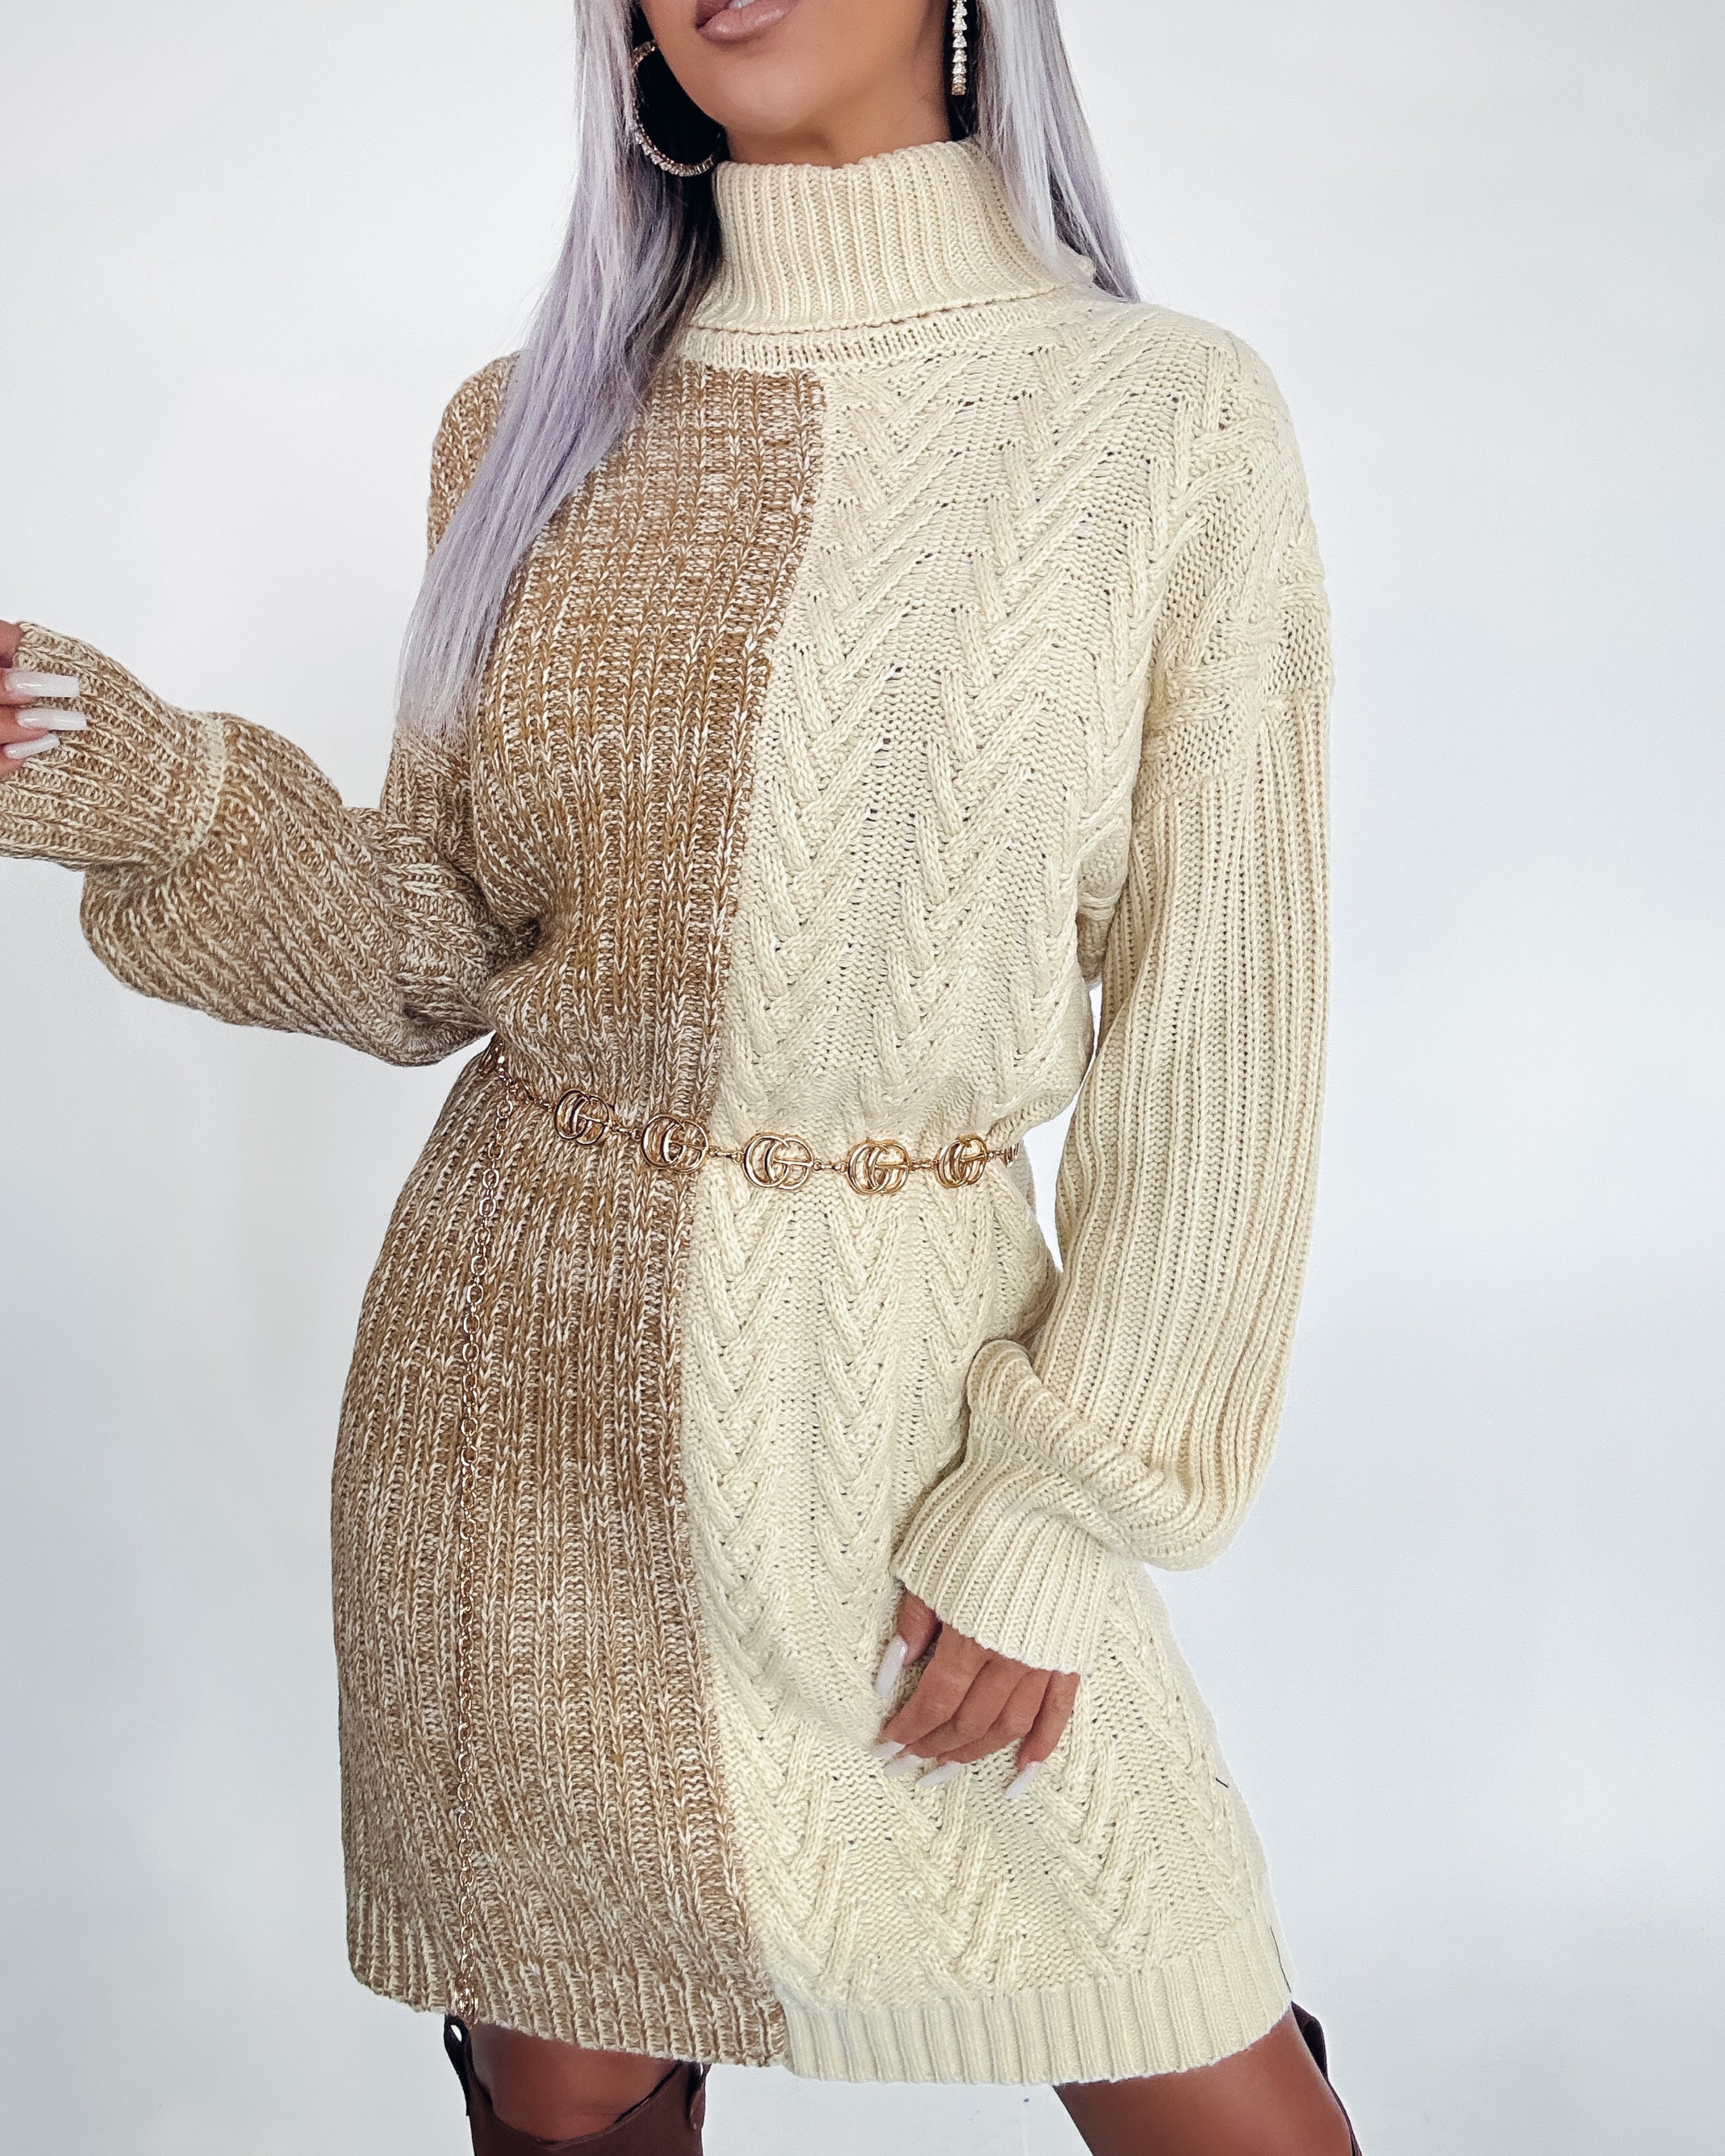 From Dusk Turtleneck Sweater Dress- Taupe/Oatmeal